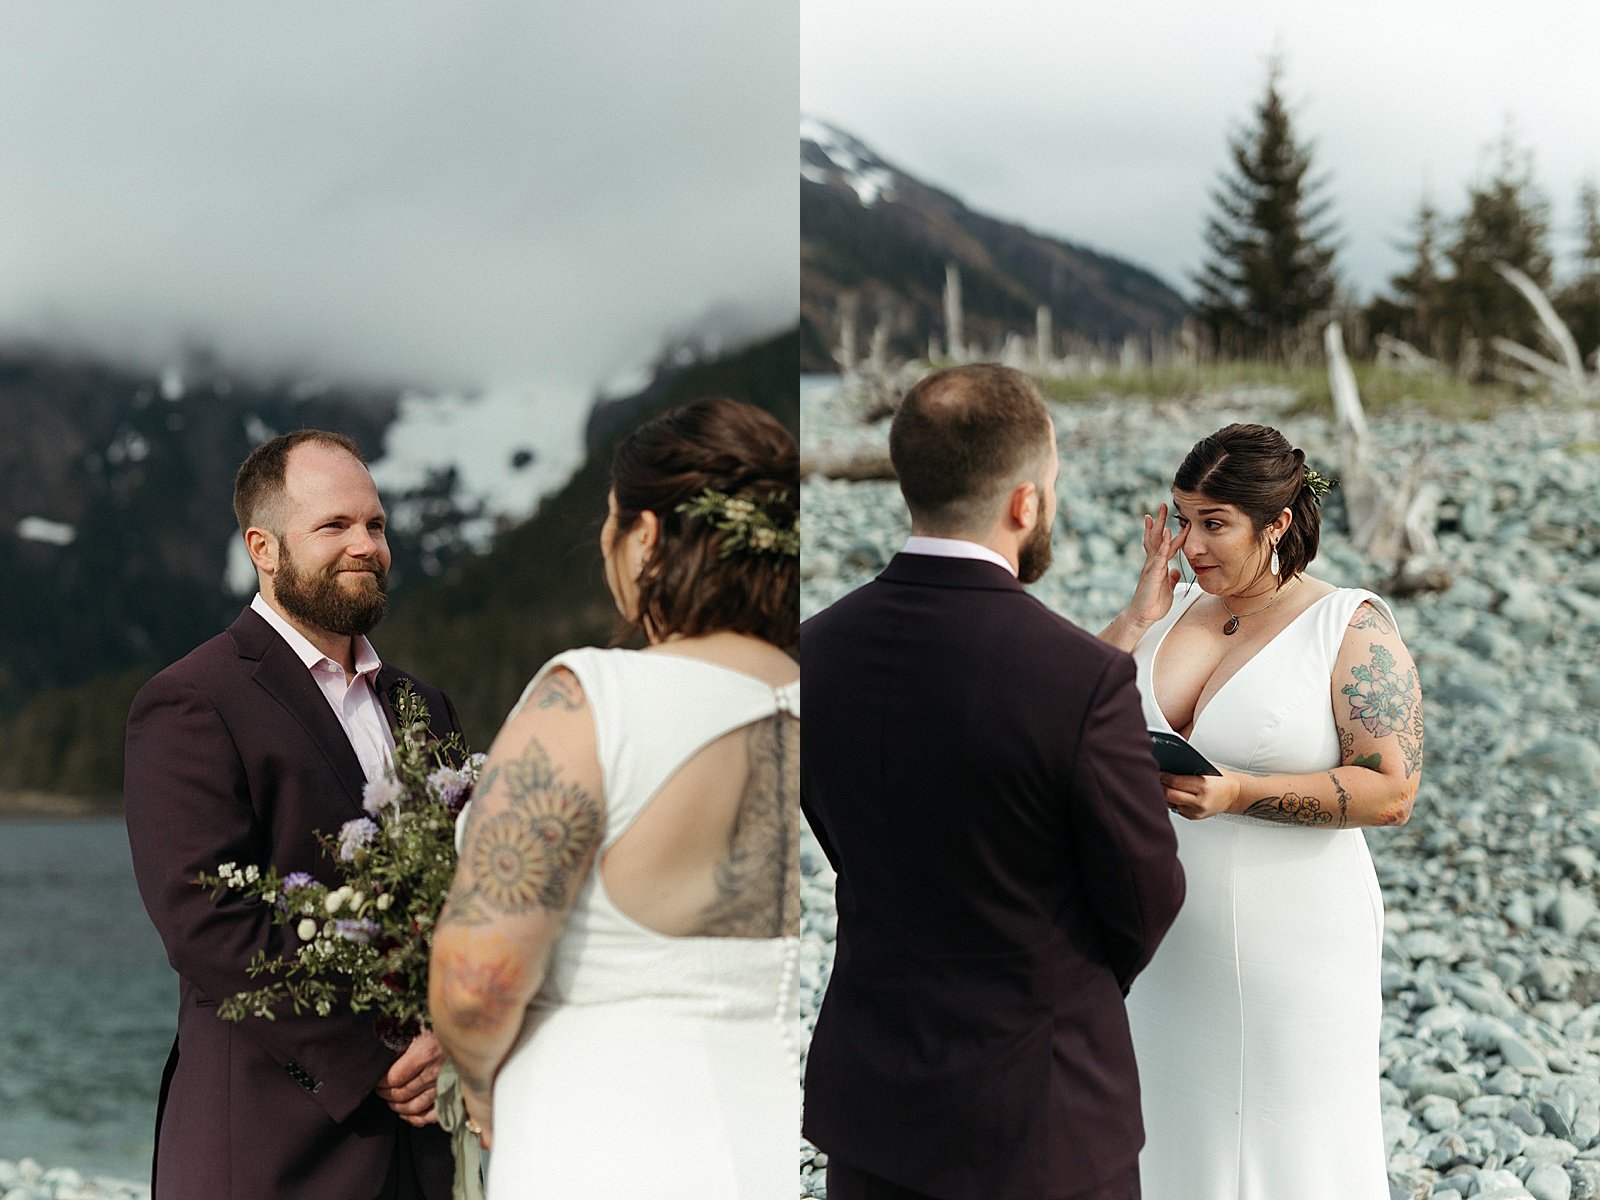  Groom saying his vows in private ceremony by an Alaska wedding photographer 